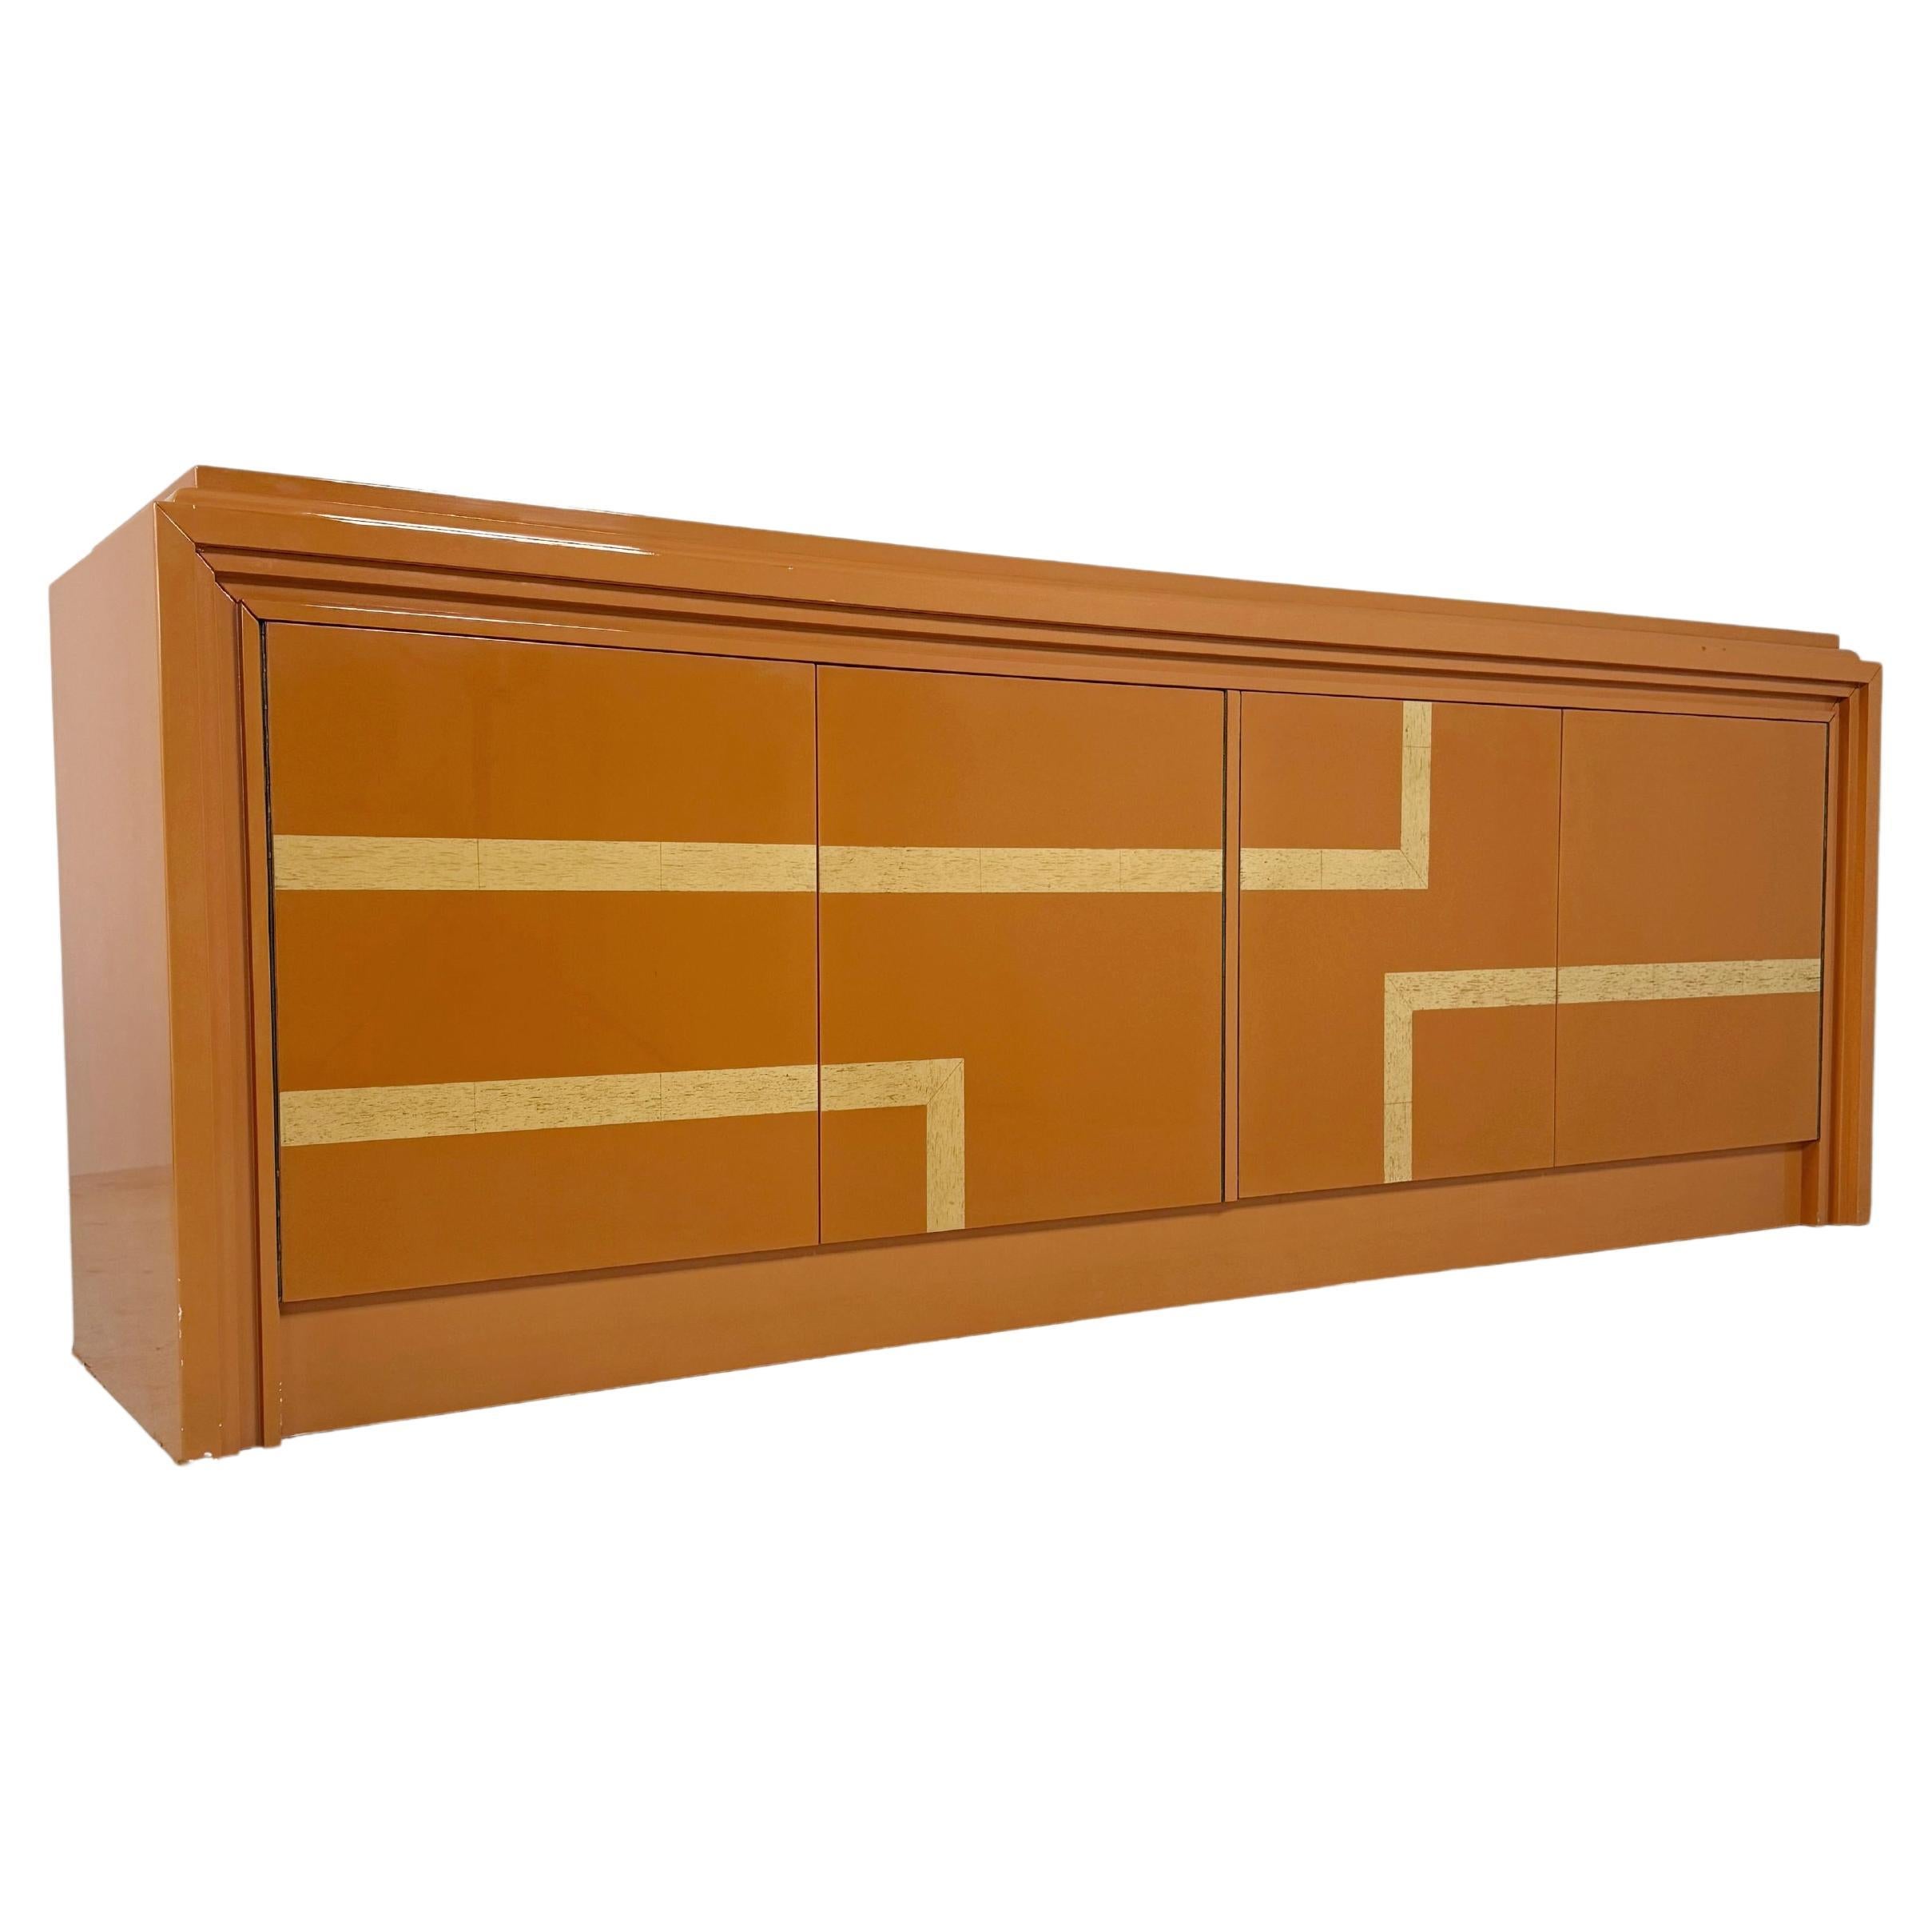 Italian orange lacquered sideboard with inlay, 1970s For Sale